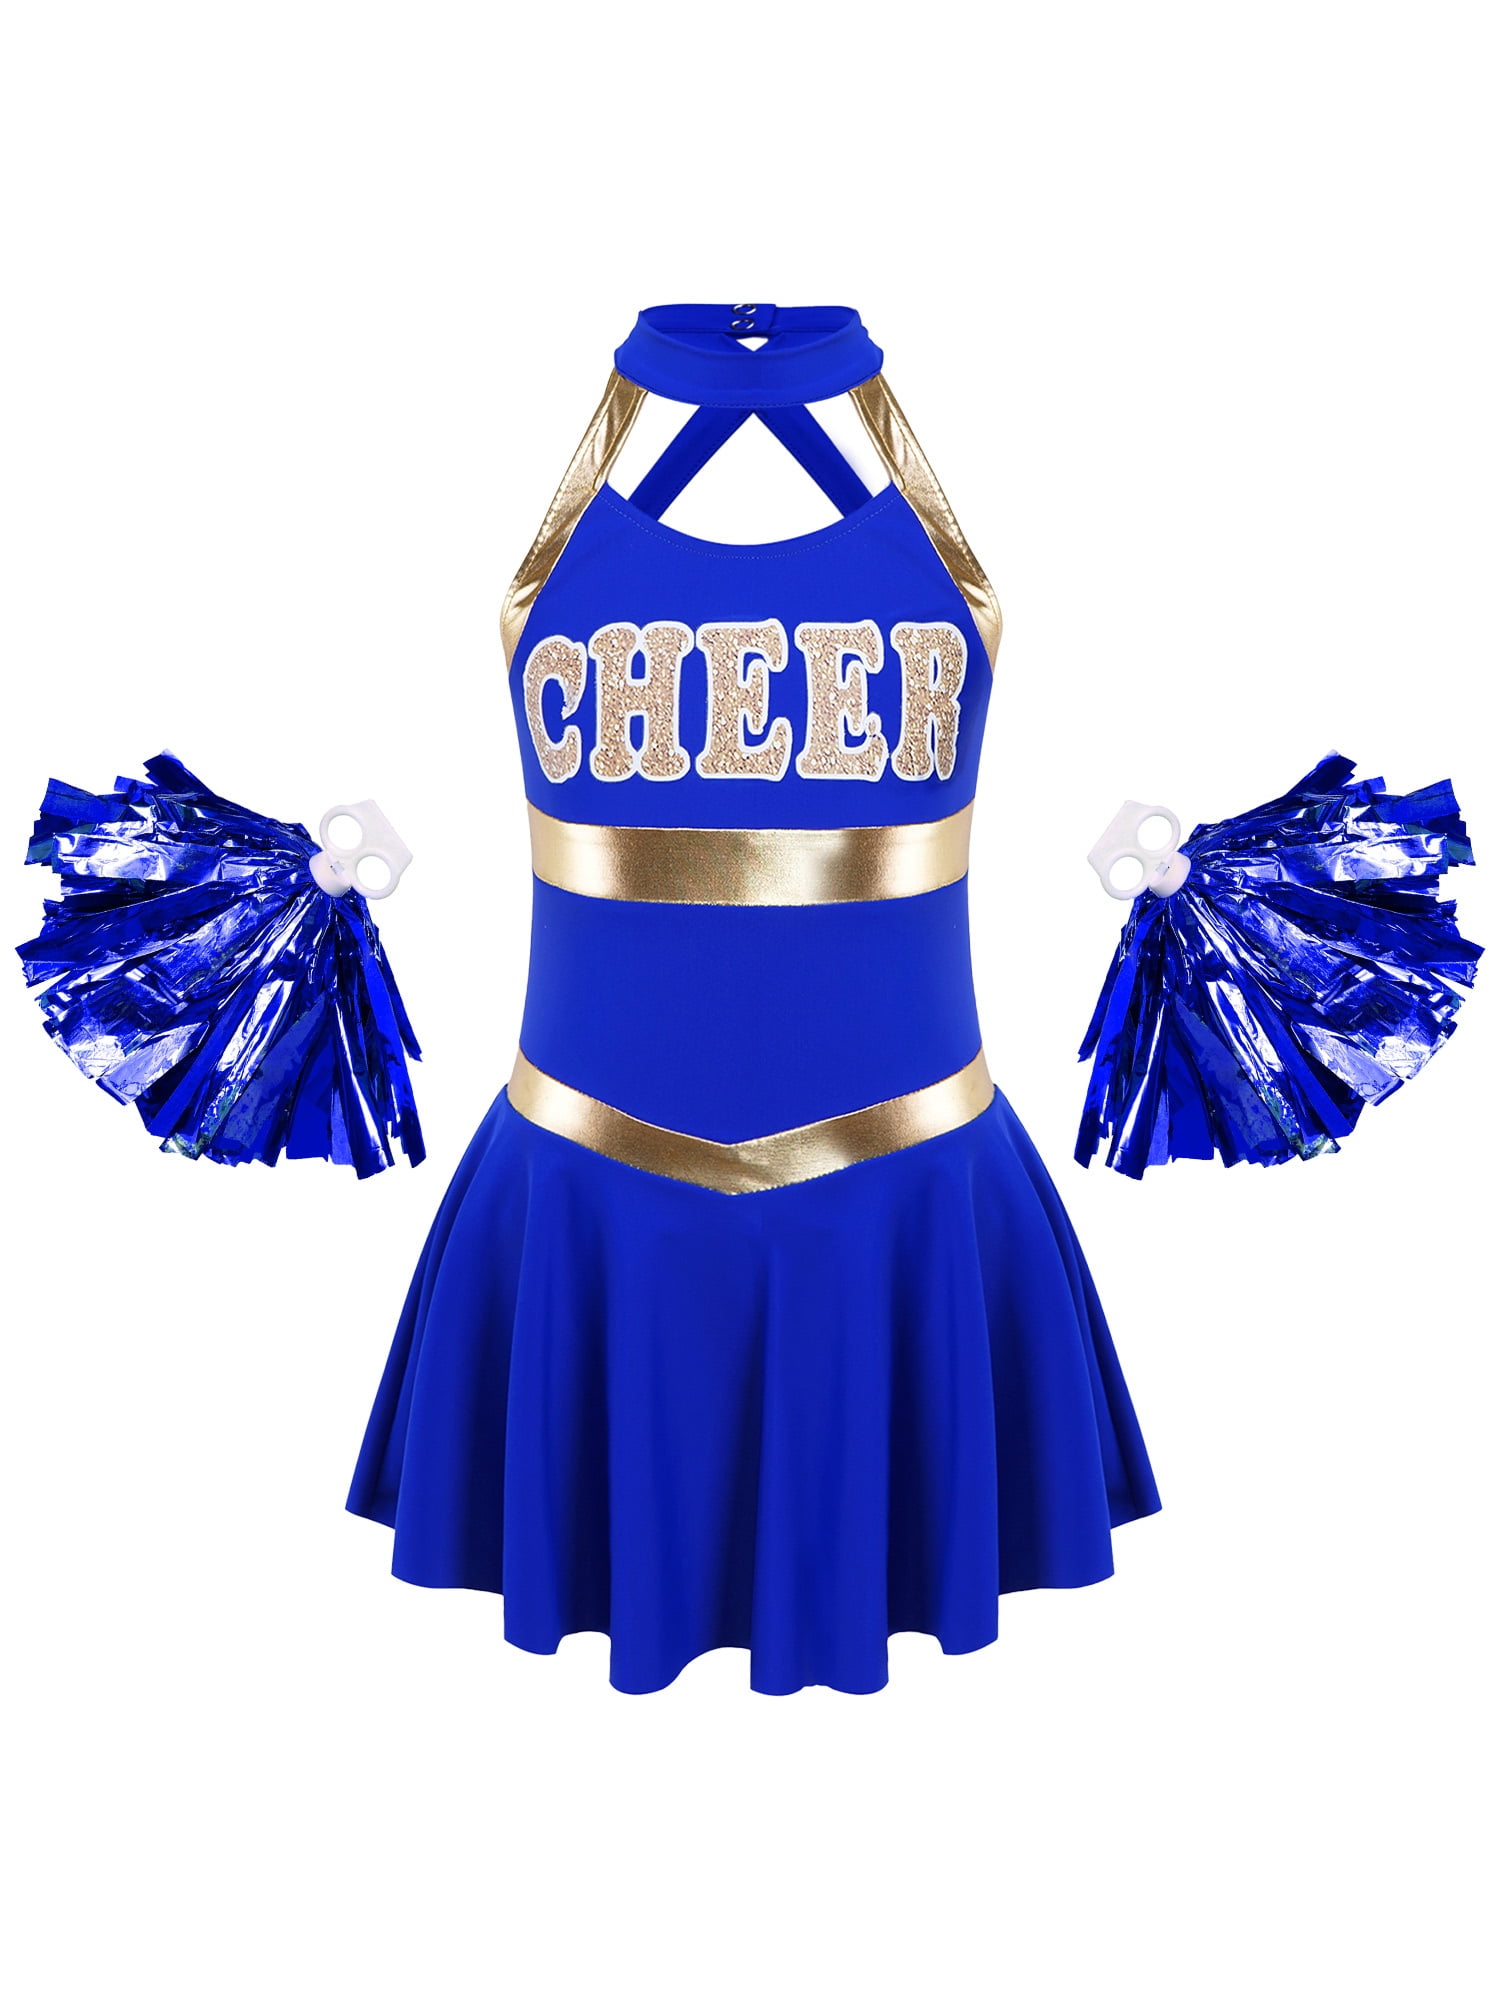 MSemis Kids Girls Cheer Leader Outfits School Uniform Costume with Pom ...